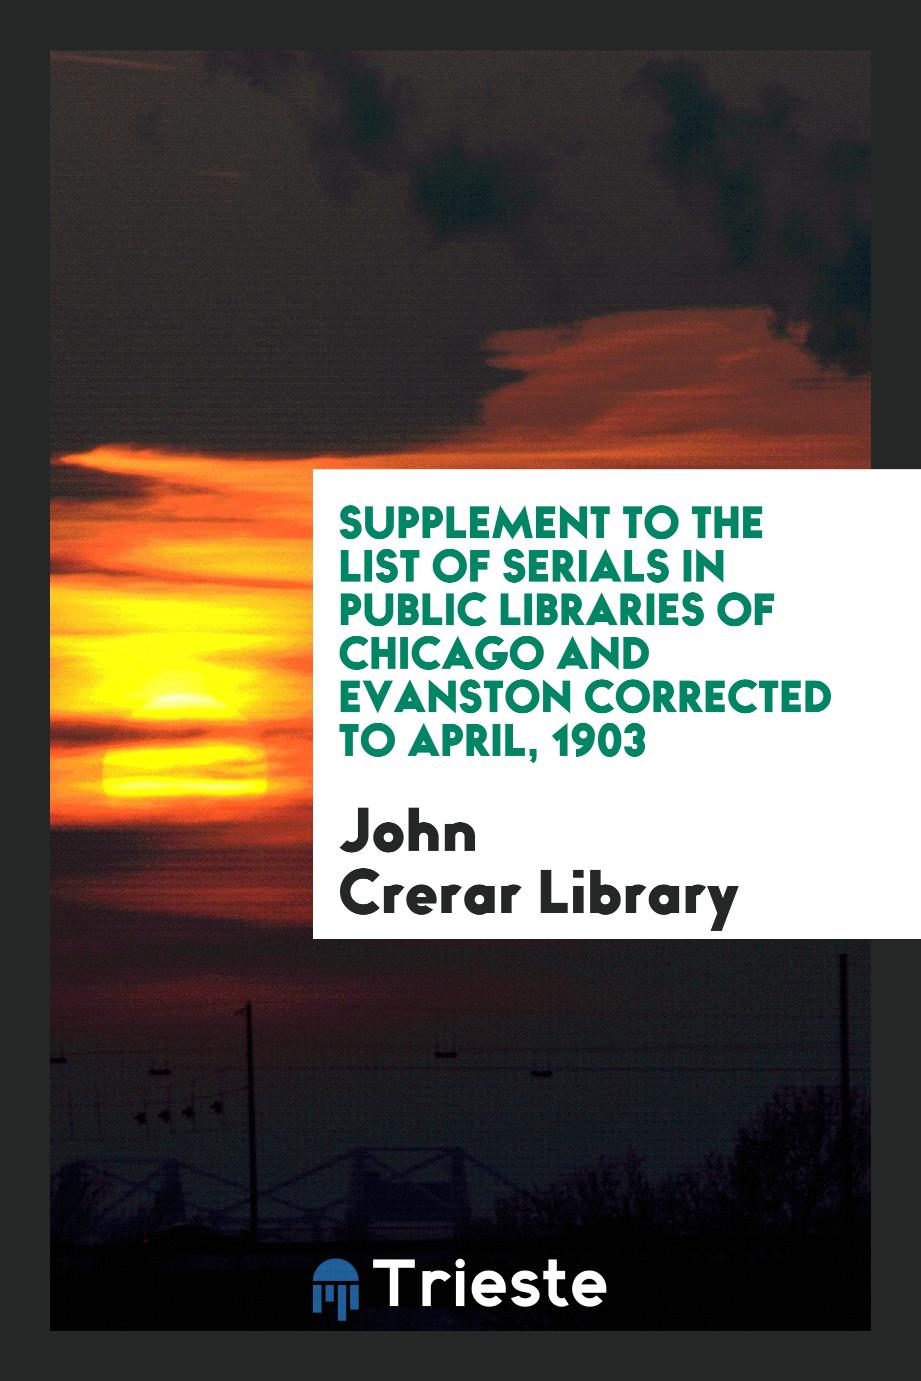 Supplement to the List of Serials in Public Libraries of Chicago and Evanston Corrected to April, 1903